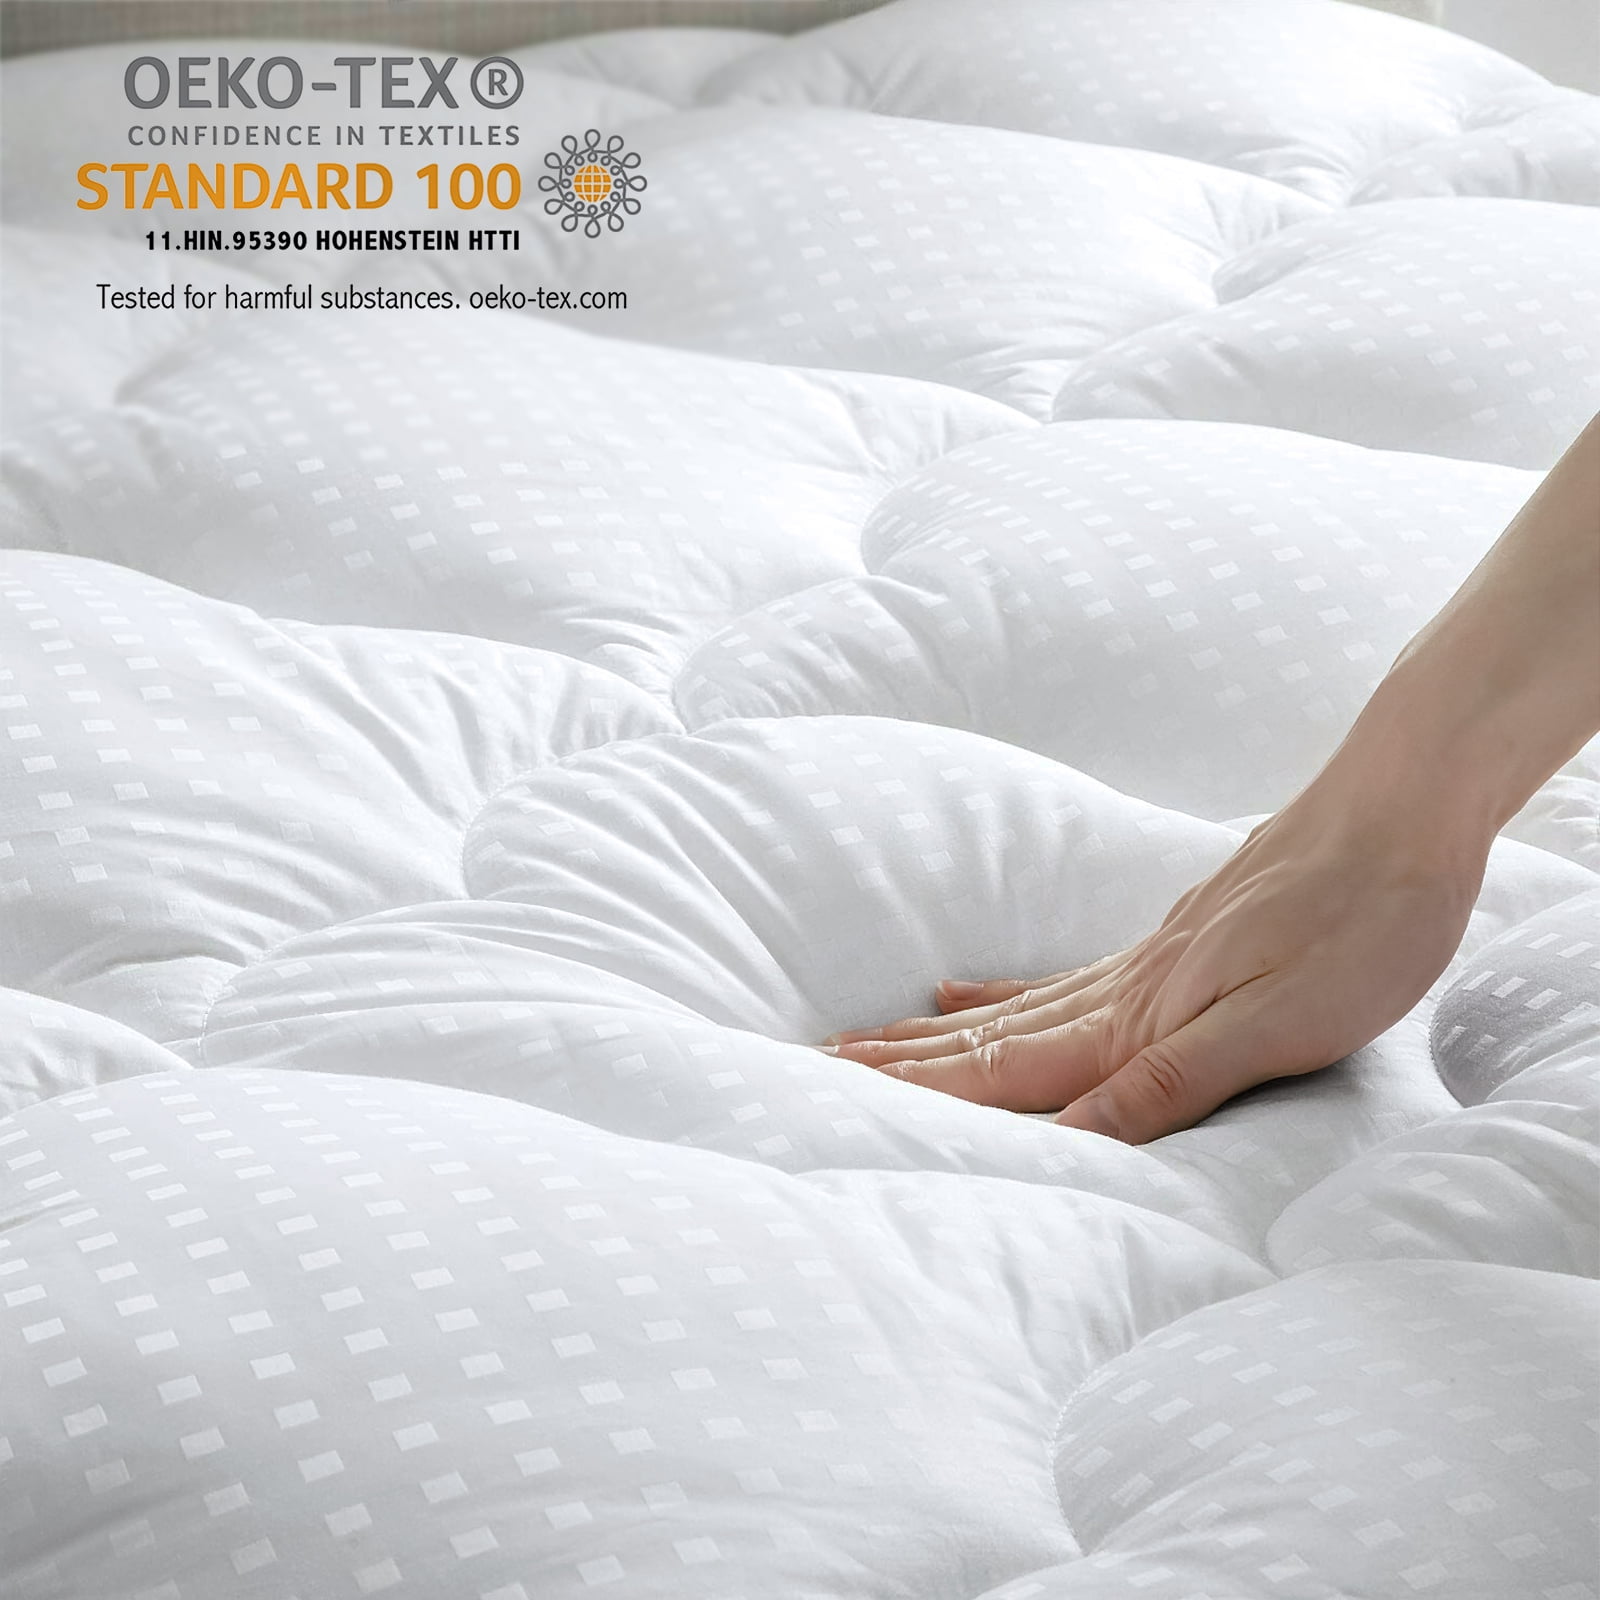 12" DEEP HOTEL QUALITY QUILTED MATTRESS PROTECTOR FITTED BED COVER All SIZES 